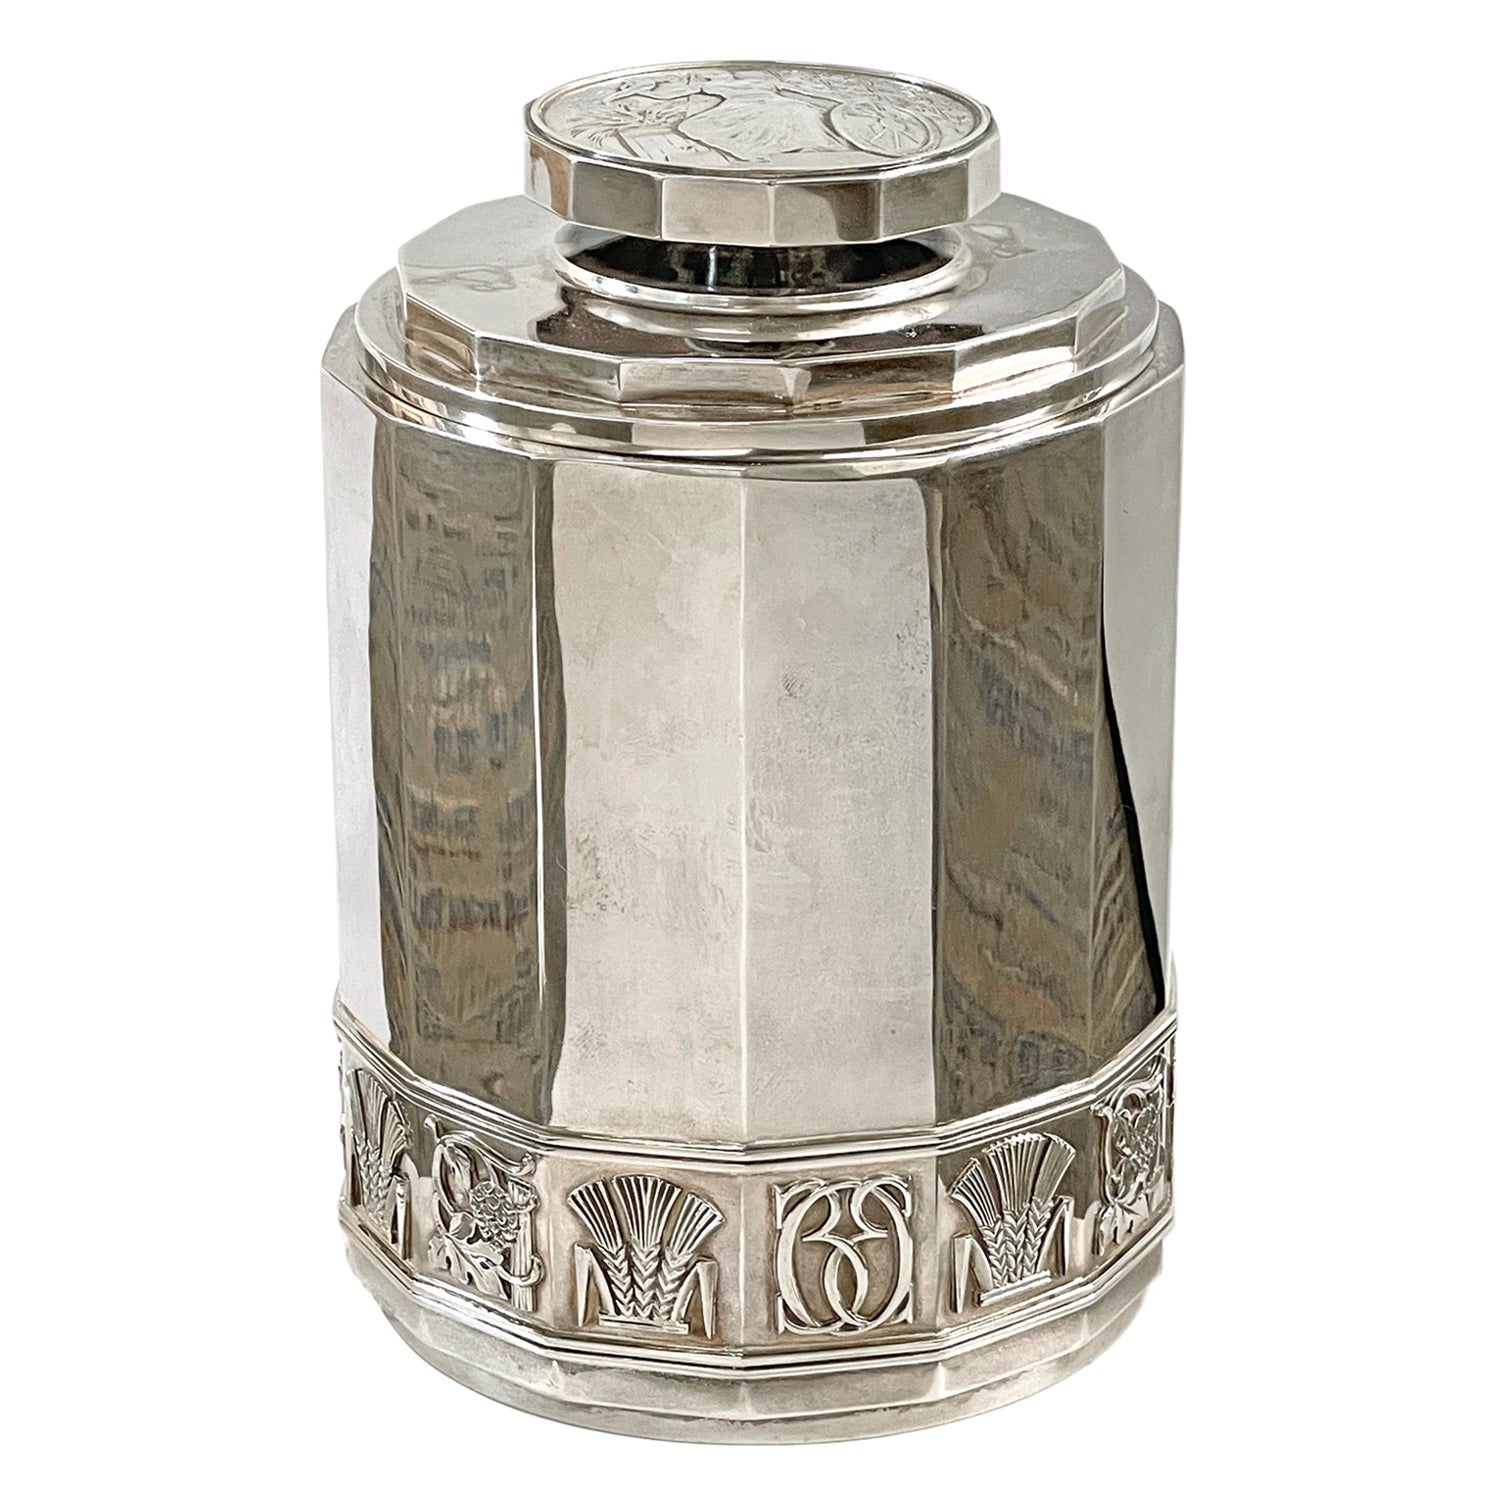 "Ceres, Wheat & Hops, " Extraordinary, Art Deco Sterling Silver Canister, Sweden